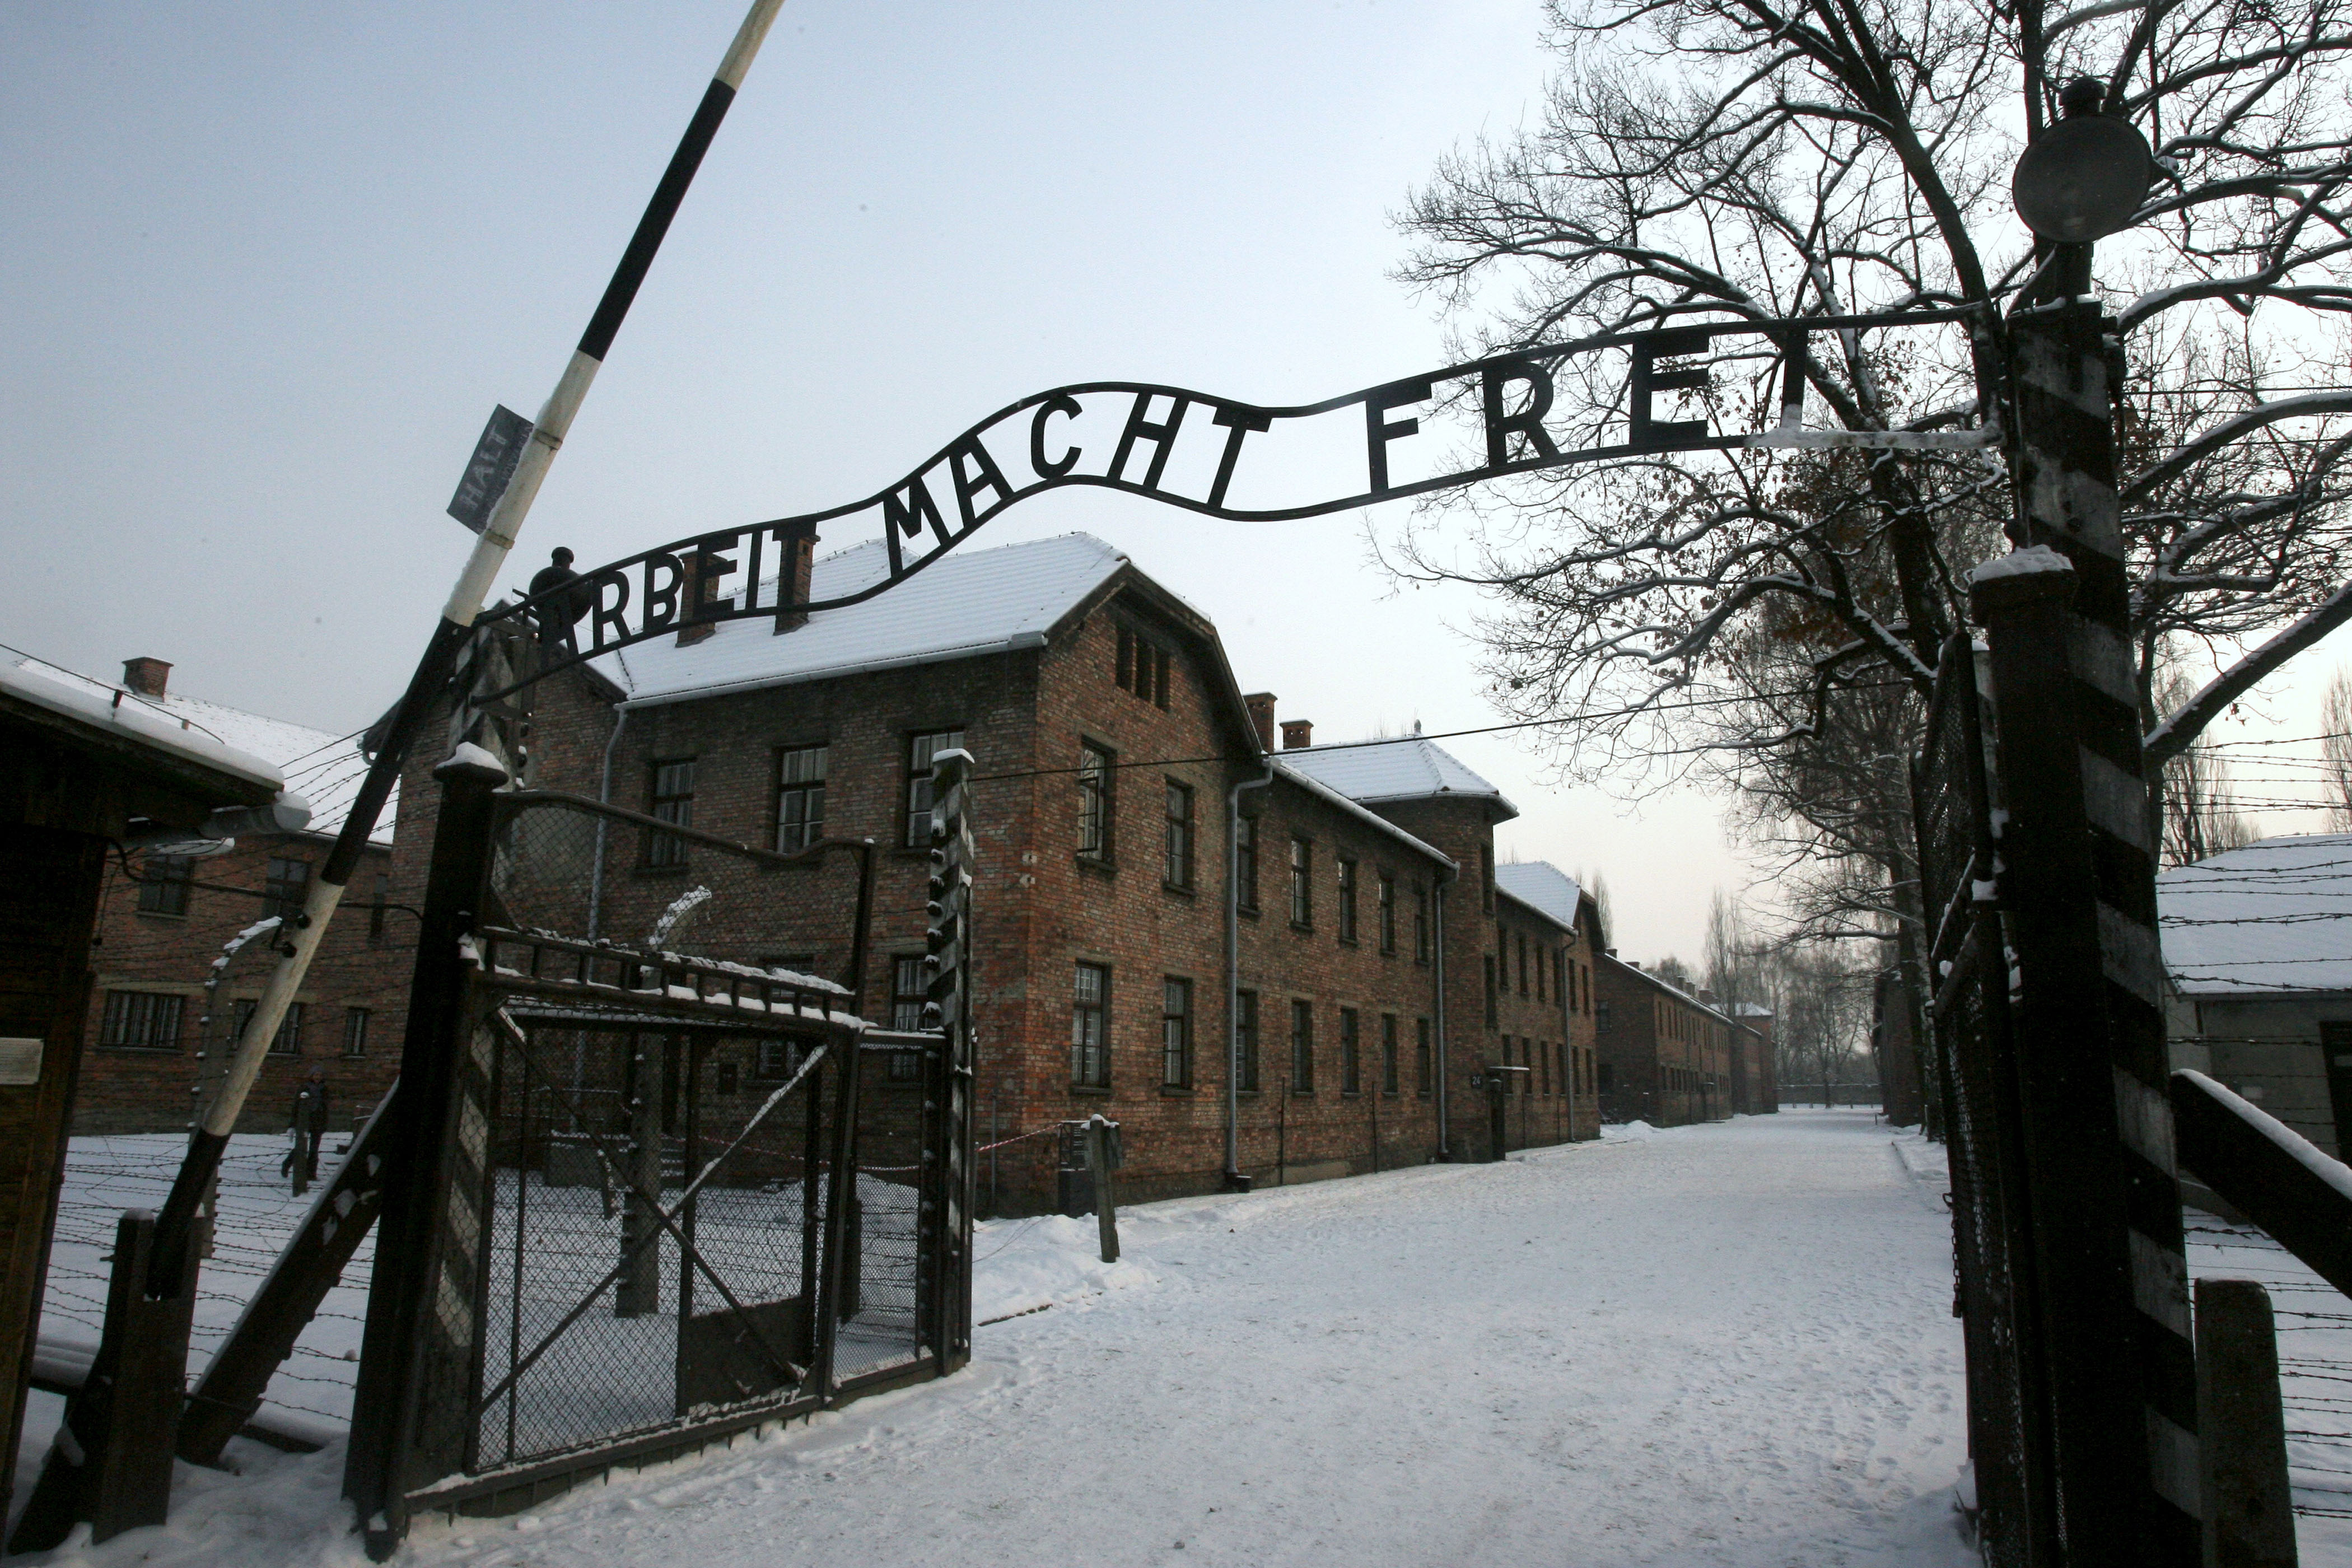 A replica hung in place of the stolen infamous "Arbeit macht frei" sign at the former Nazi death camp Auschwitz in Oswiecim, Poland on Dec. 18, 2009.